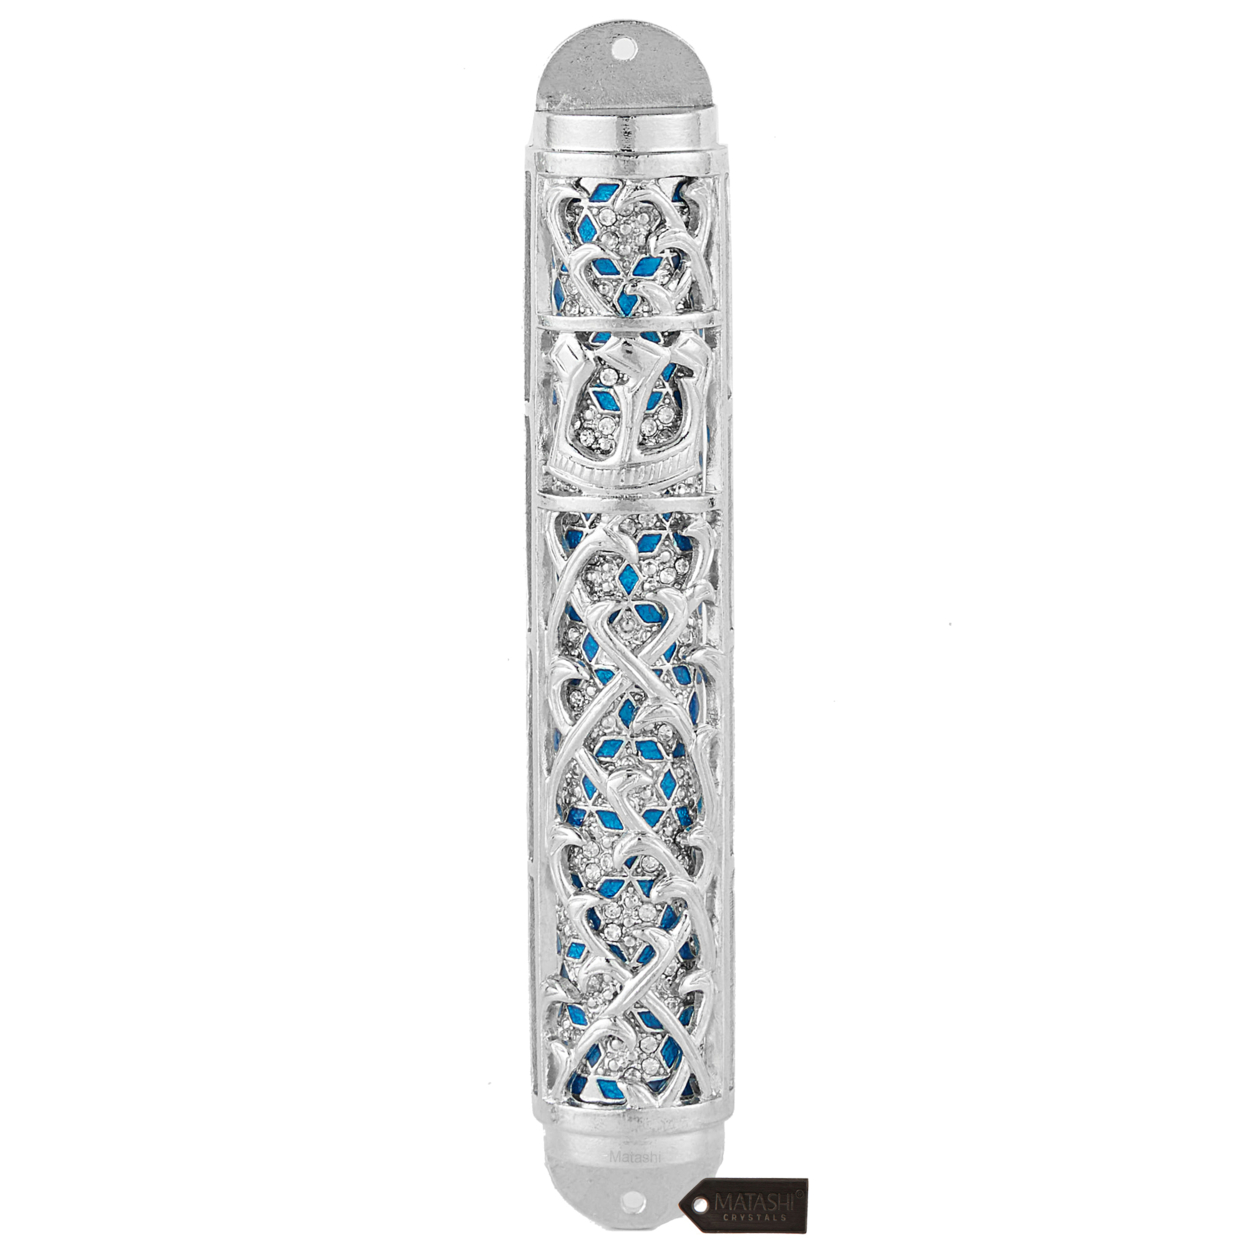 Matashi Hand Painted Enamel 7'' Mezuzah With Hebrew Shin And Crystals Home Door Wall Decor Housewarming Present Gift For Holiday